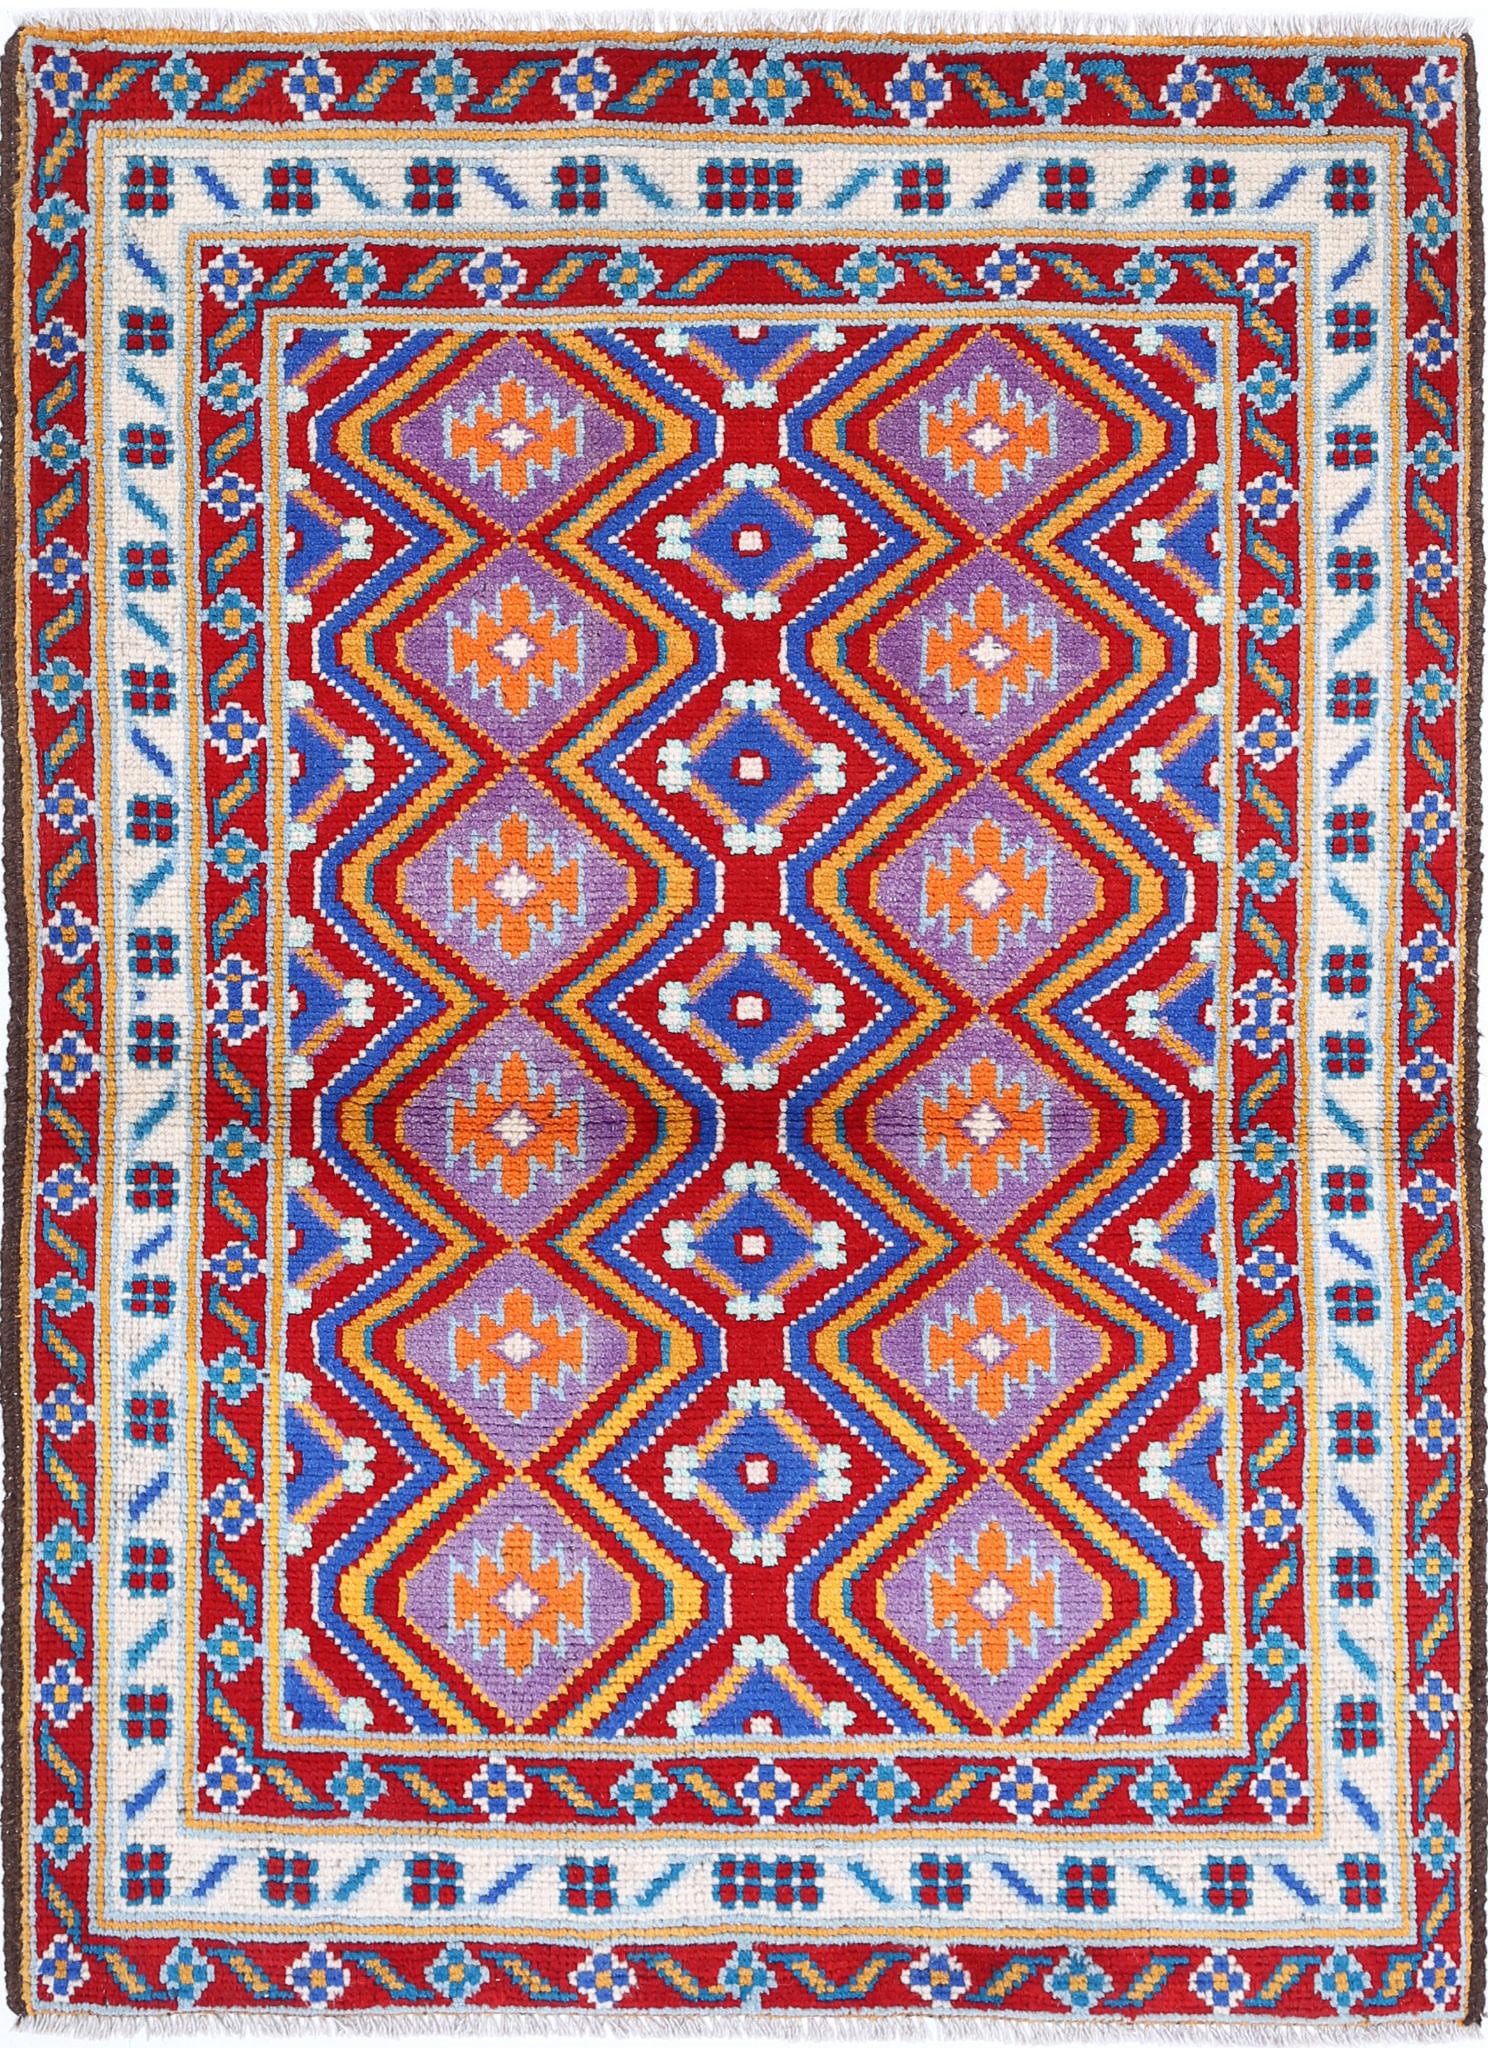 Revival-hand-knotted-qarghani-wool-rug-5014199.jpg